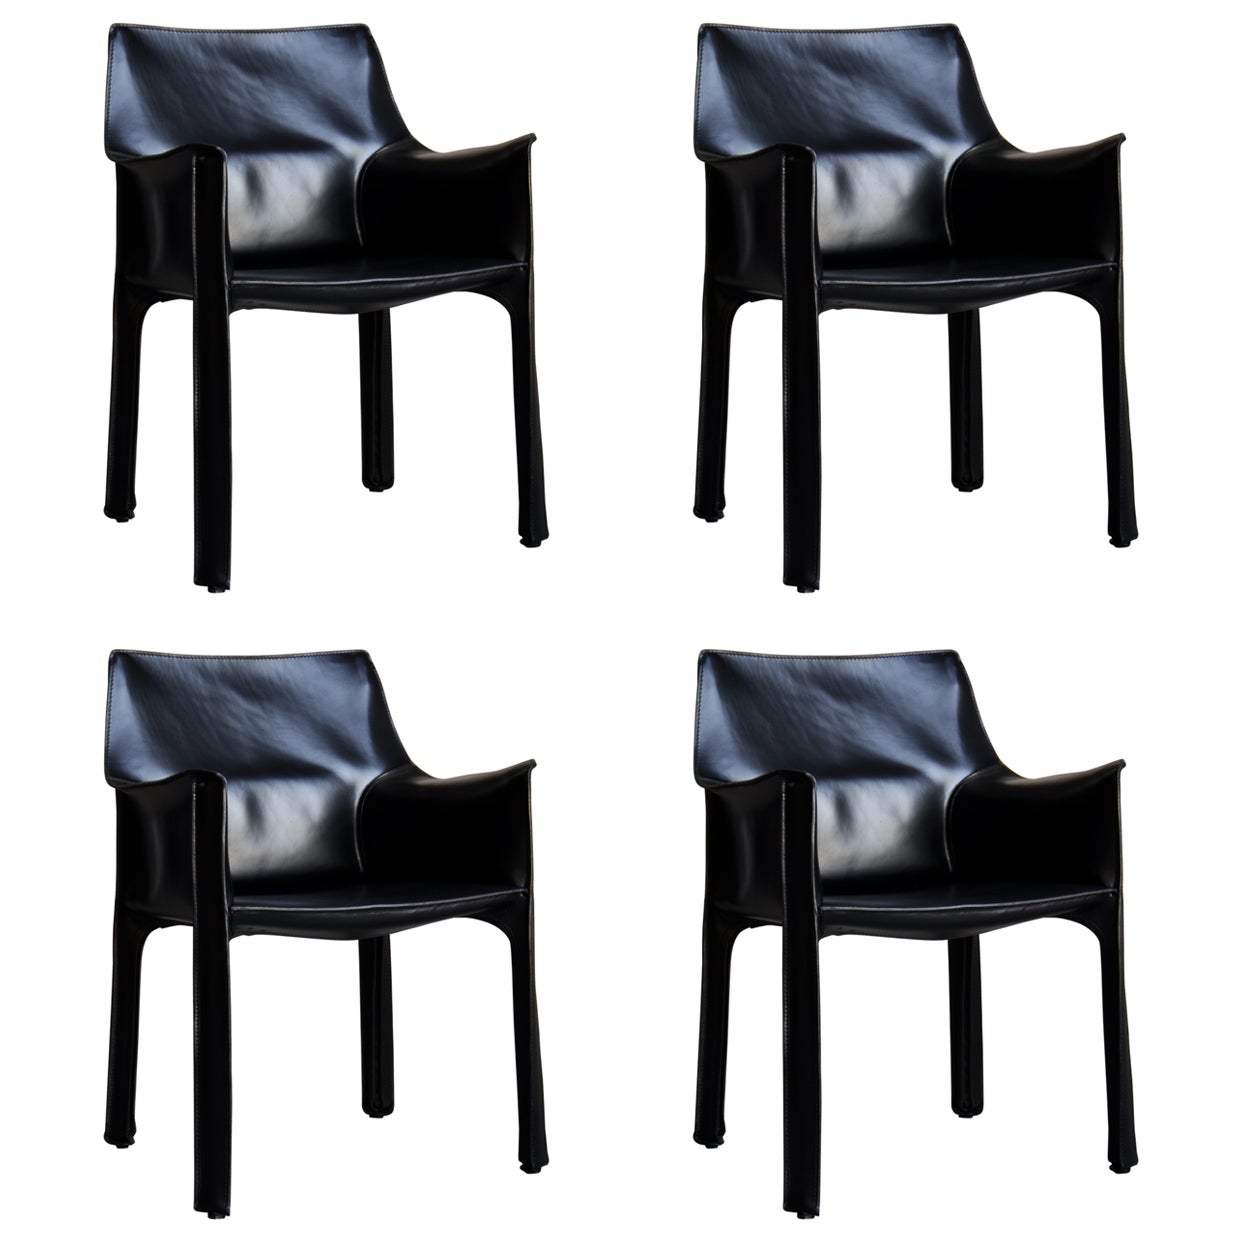 4 Mario Bellini CAB 413 Armchairs in Black Leather for Cassina, 1980s Italy